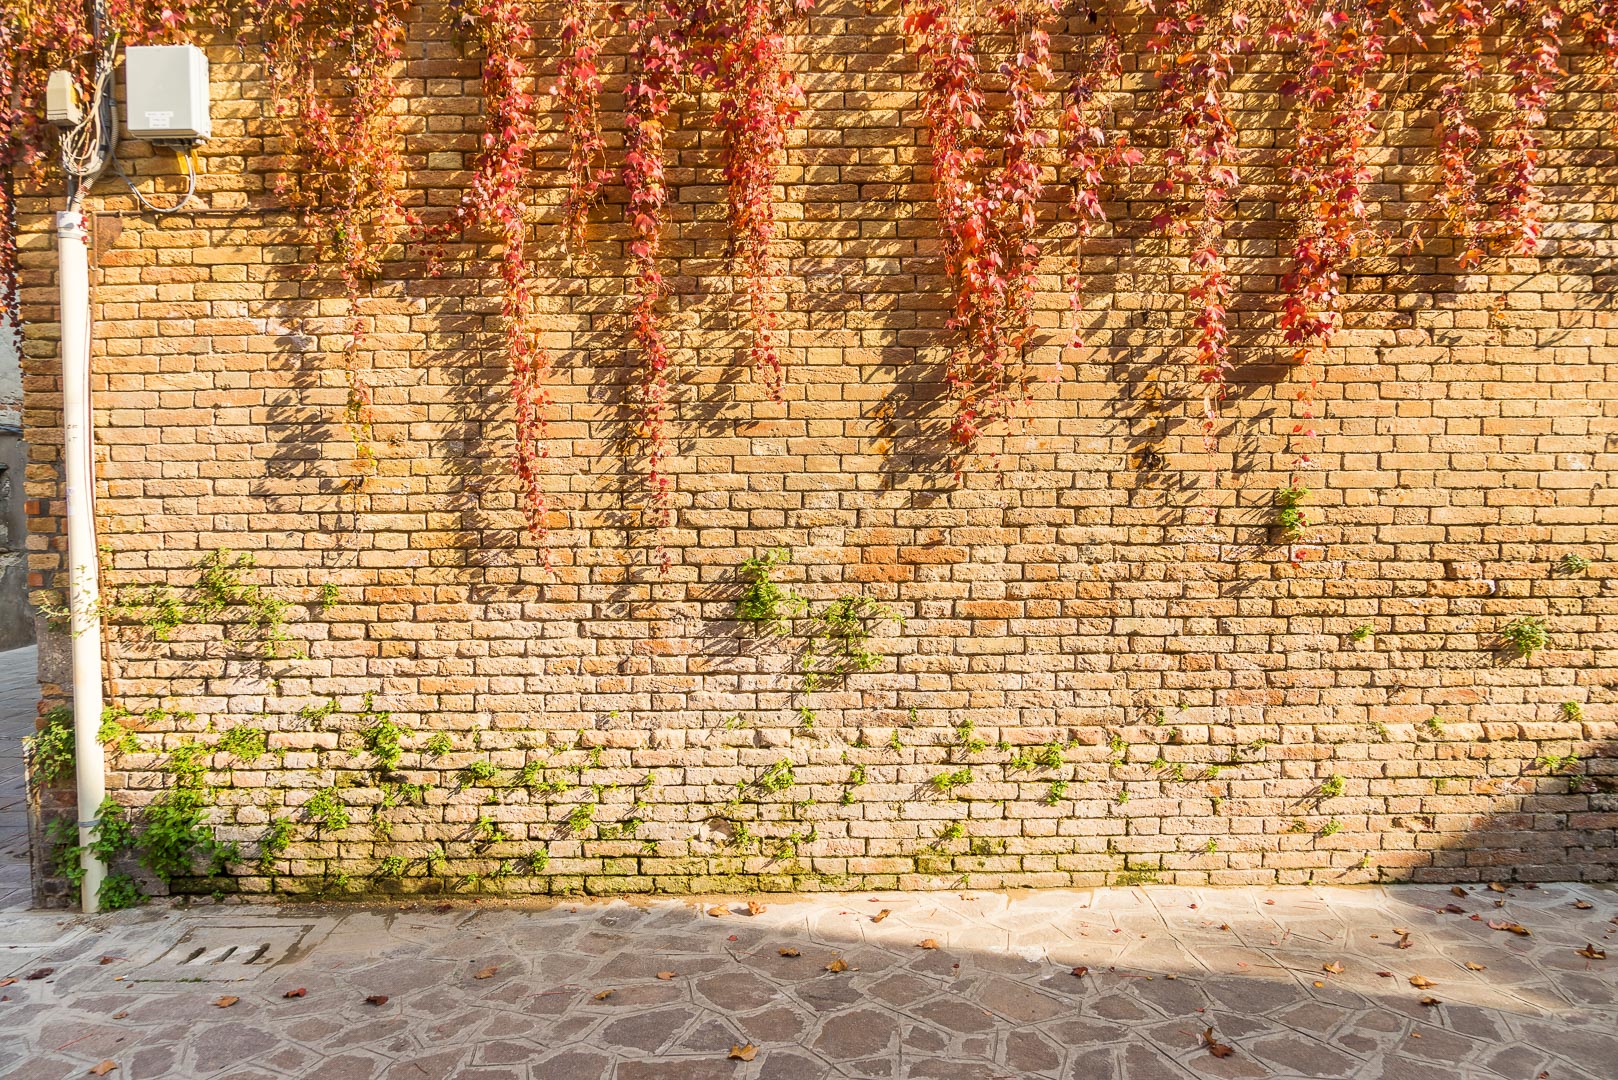 Backplate • ID: 6134 • HDRI Haven - Street With Brick Wall Covered With Leaves